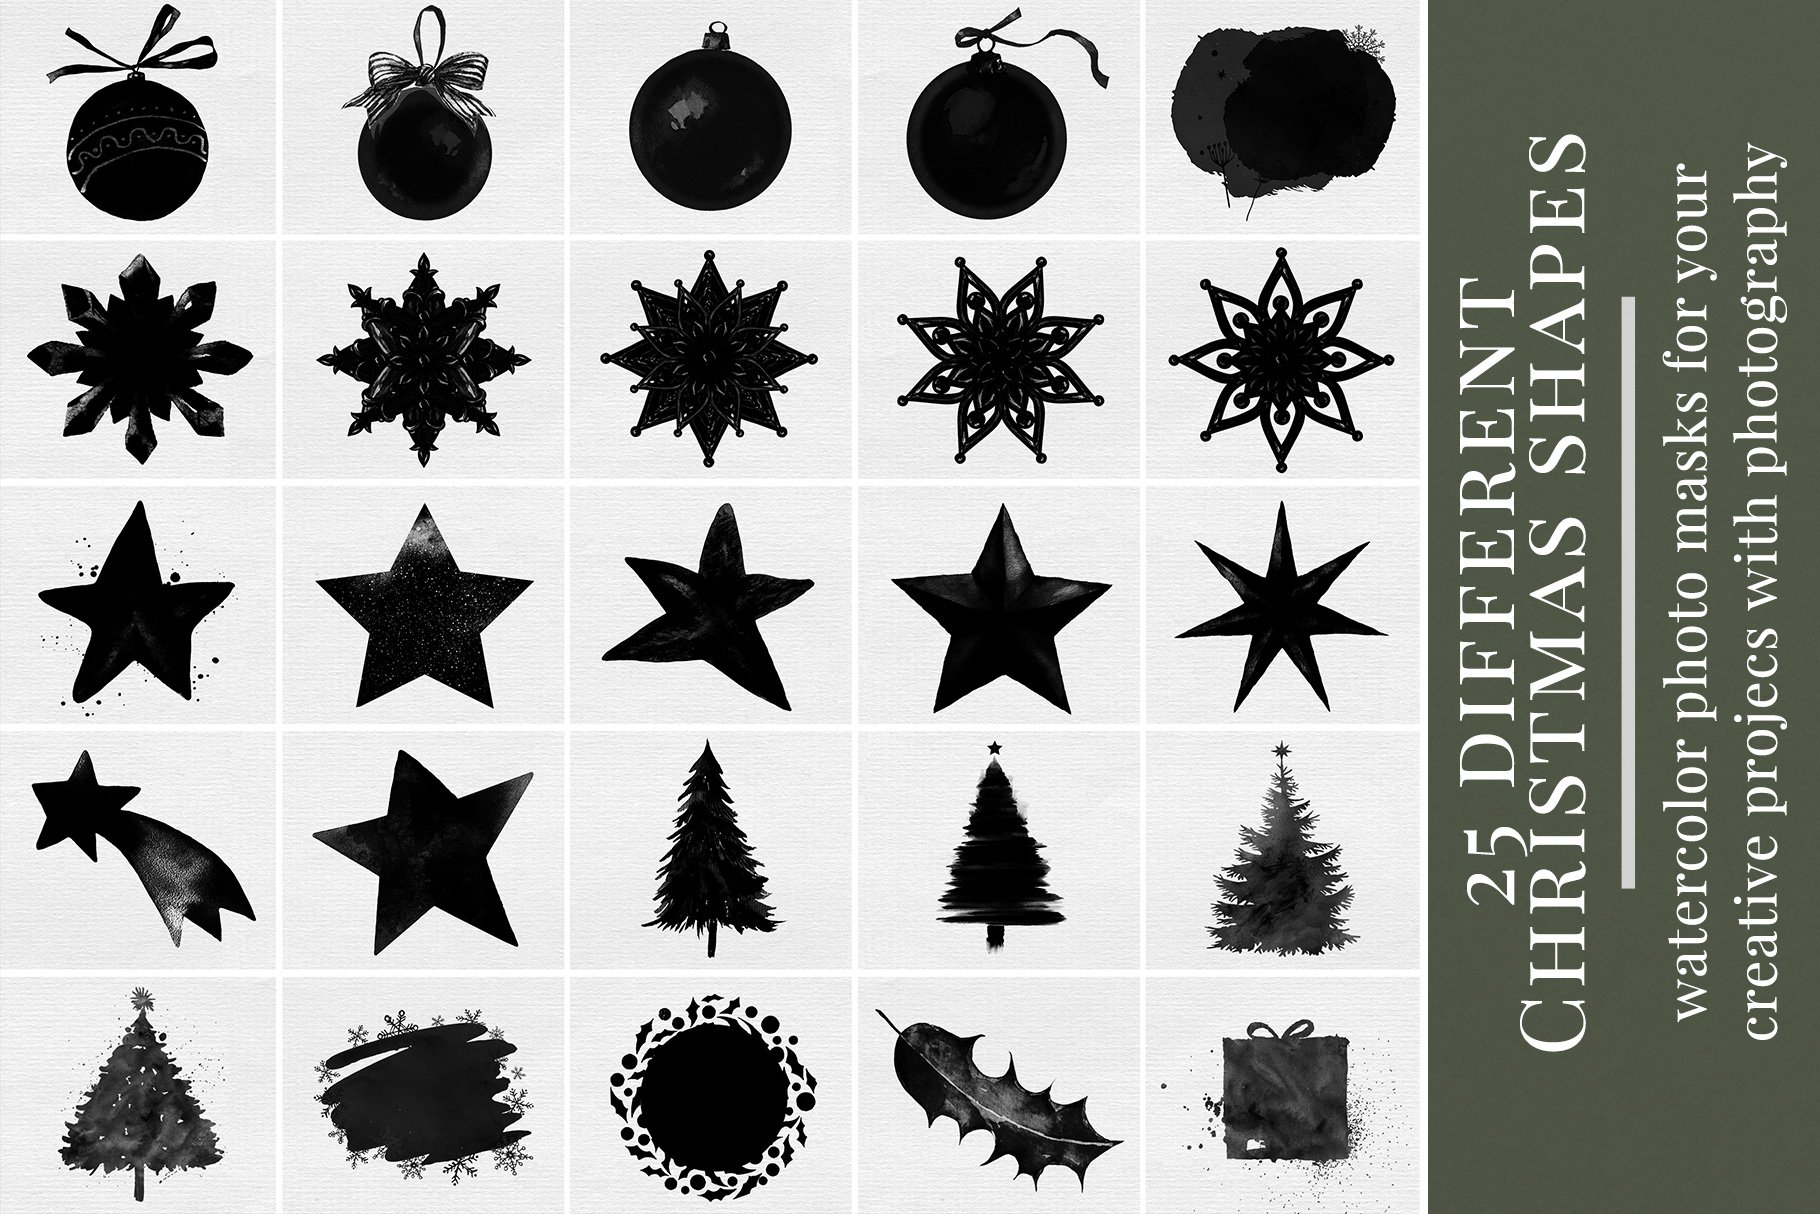 Christmas shapes photo maskspreview image.